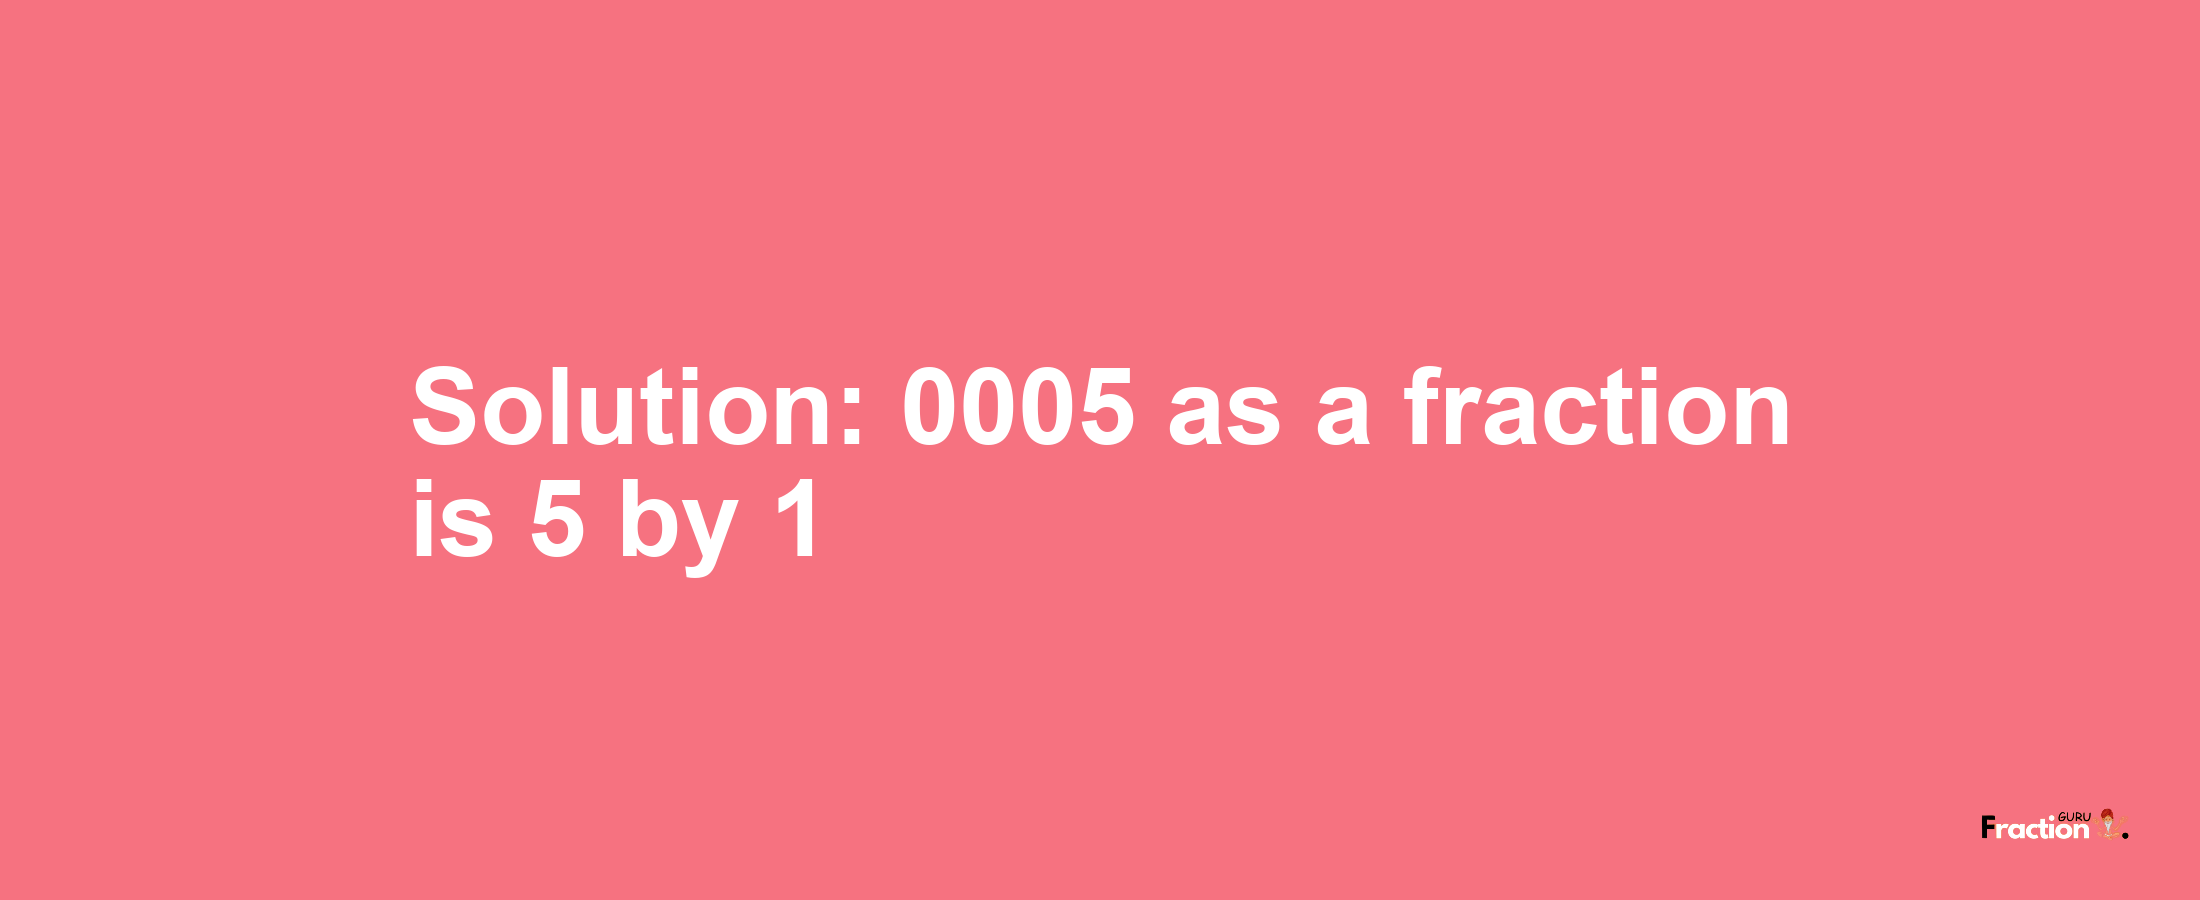 Solution:0005 as a fraction is 5/1